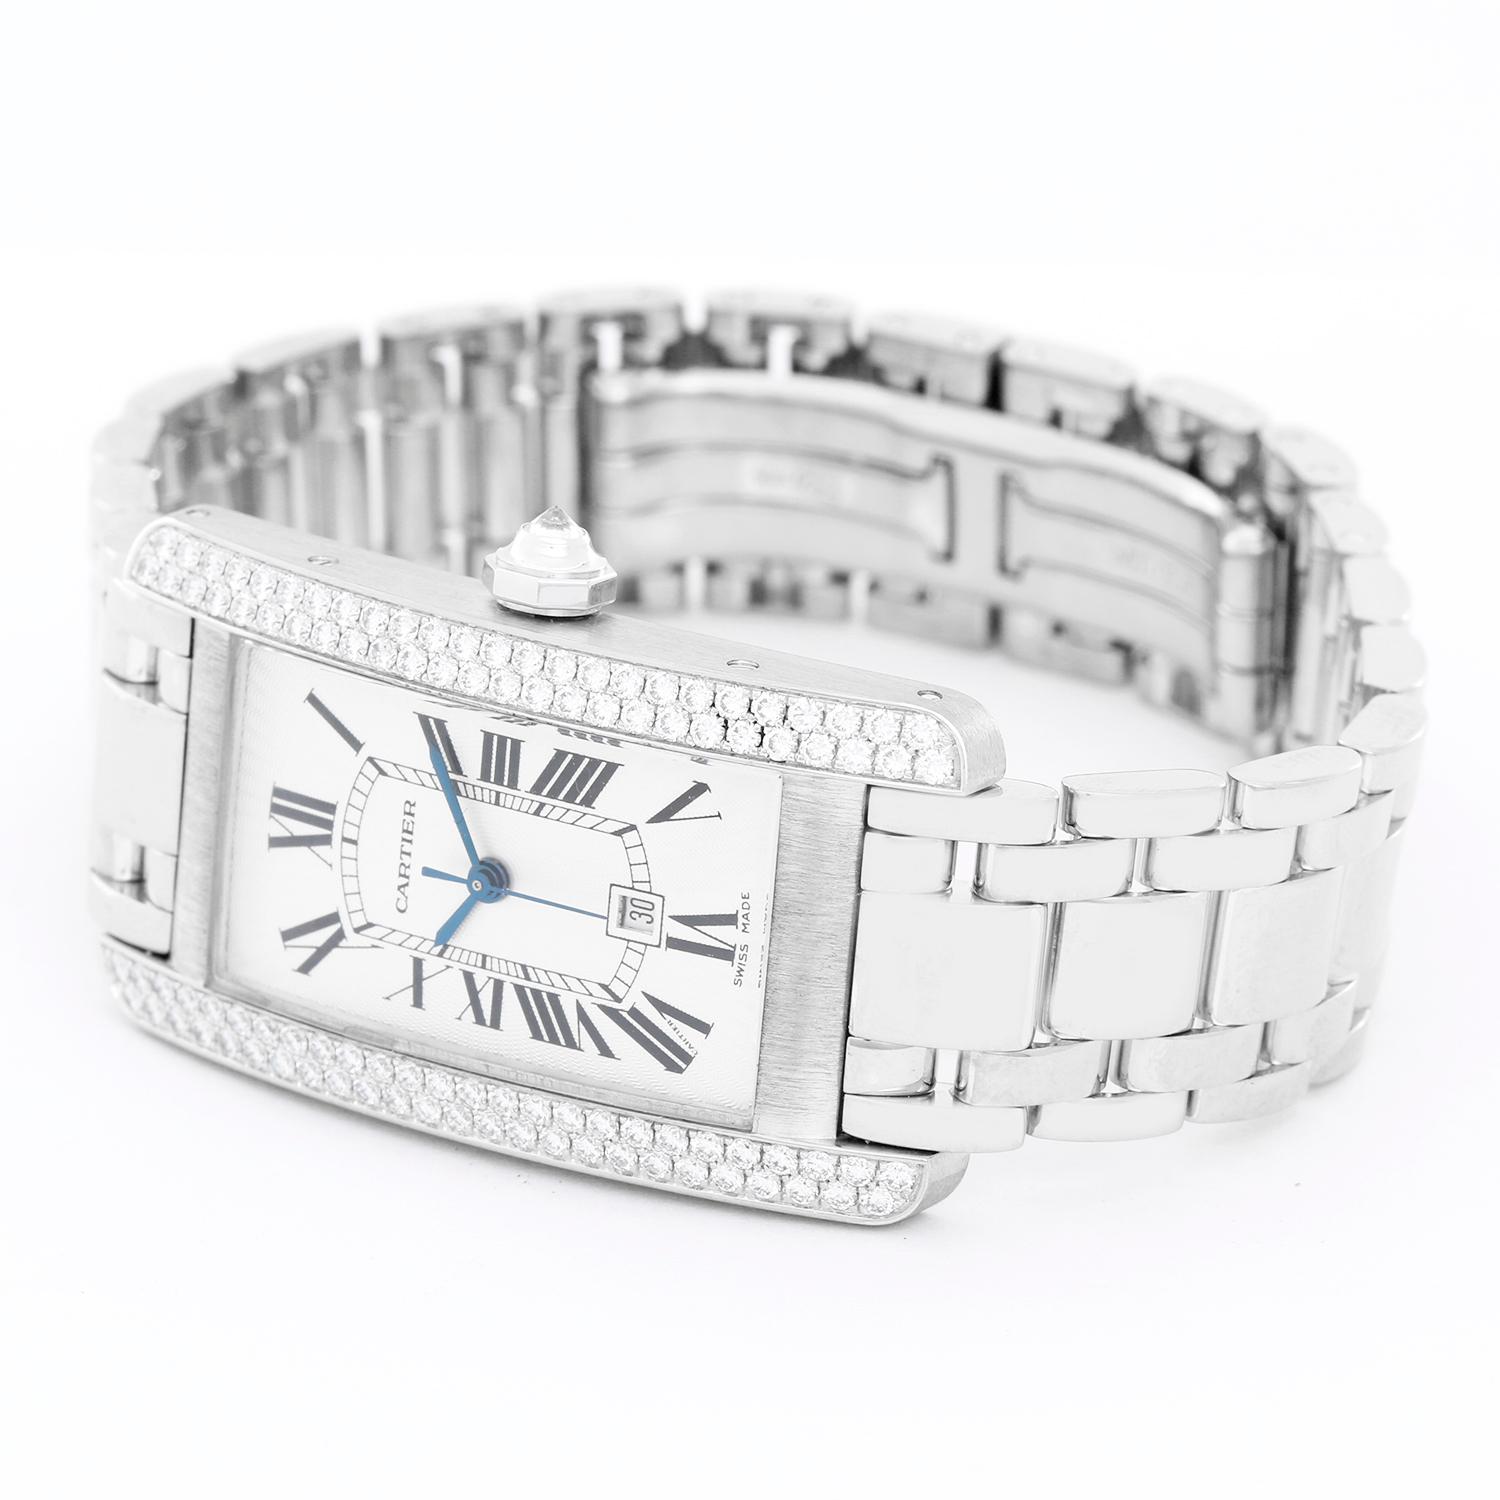 Cartier Tank Americaine 18k White Gold  Men's or Ladies Midsize Watch WB7026L1 - Automatic  winding. 18k white gold case (23mm x 41mm) Double Diamond Row. Guilloche dial with black Roman numerals; date at 6 o'clock position. 18K White gold cartier